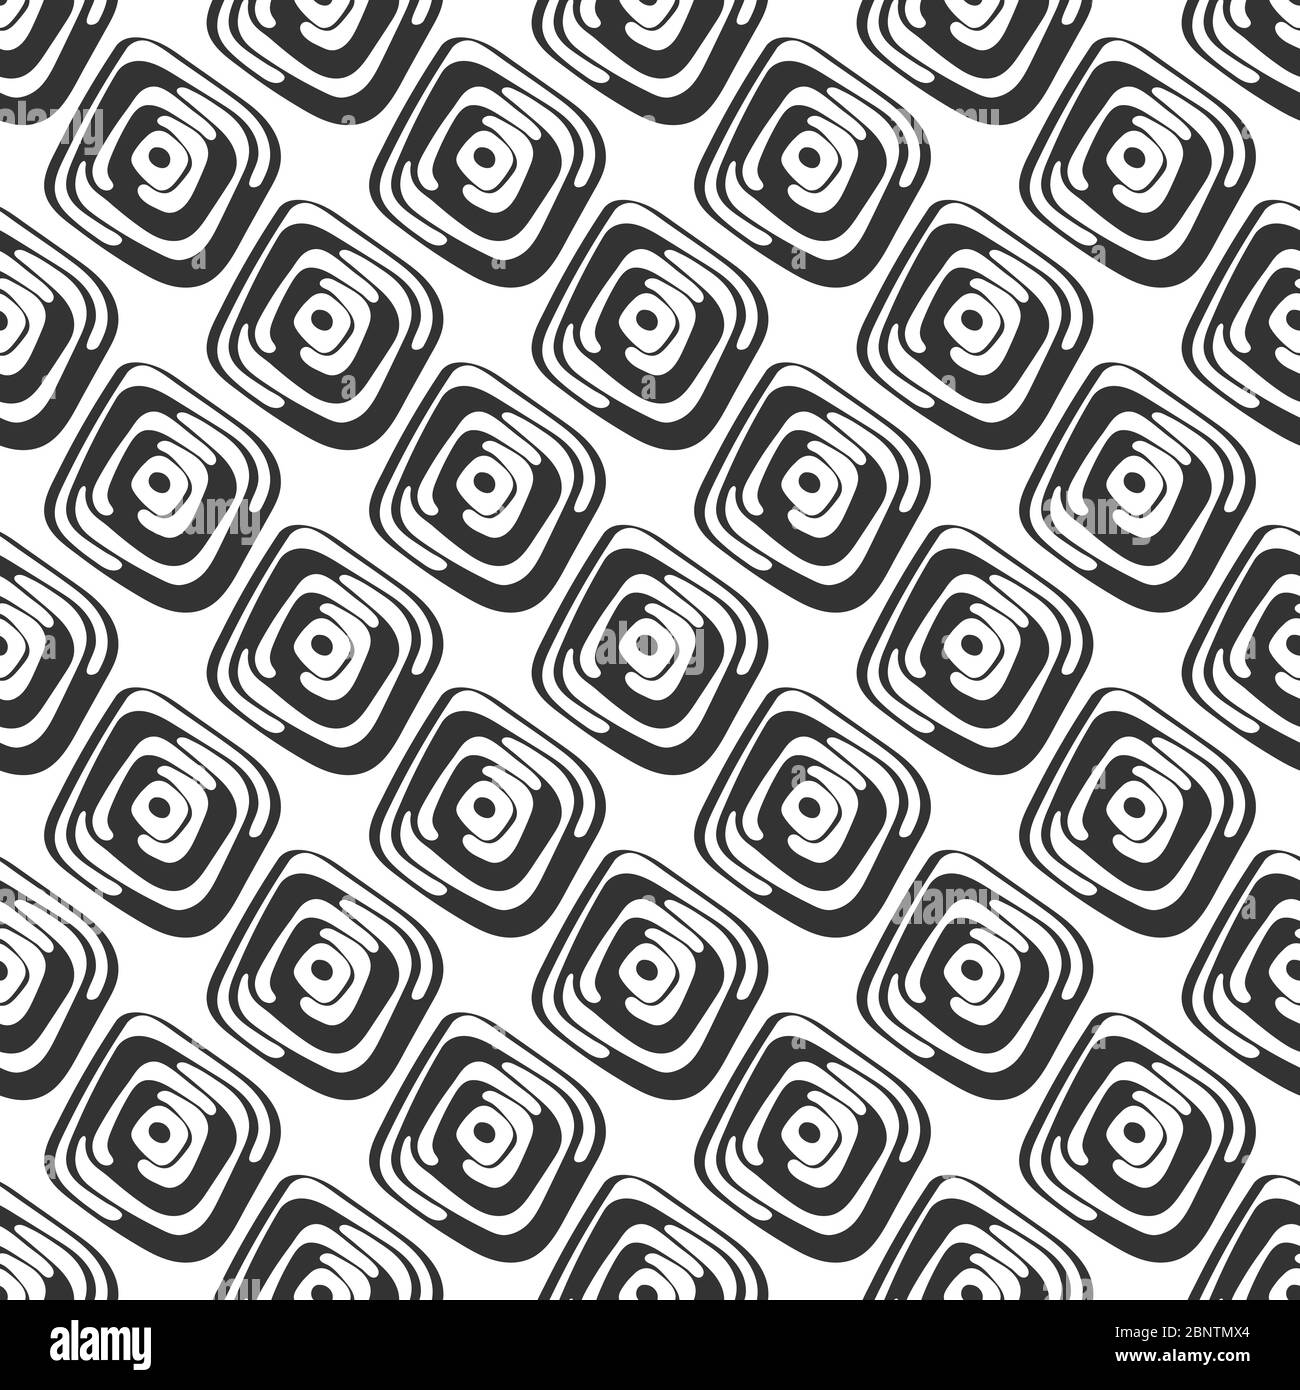 Vector seamless pattern of arbitrary shapes for background, banner, screen saver, and design. Vector illustration for texture, textiles or packaging, Stock Vector